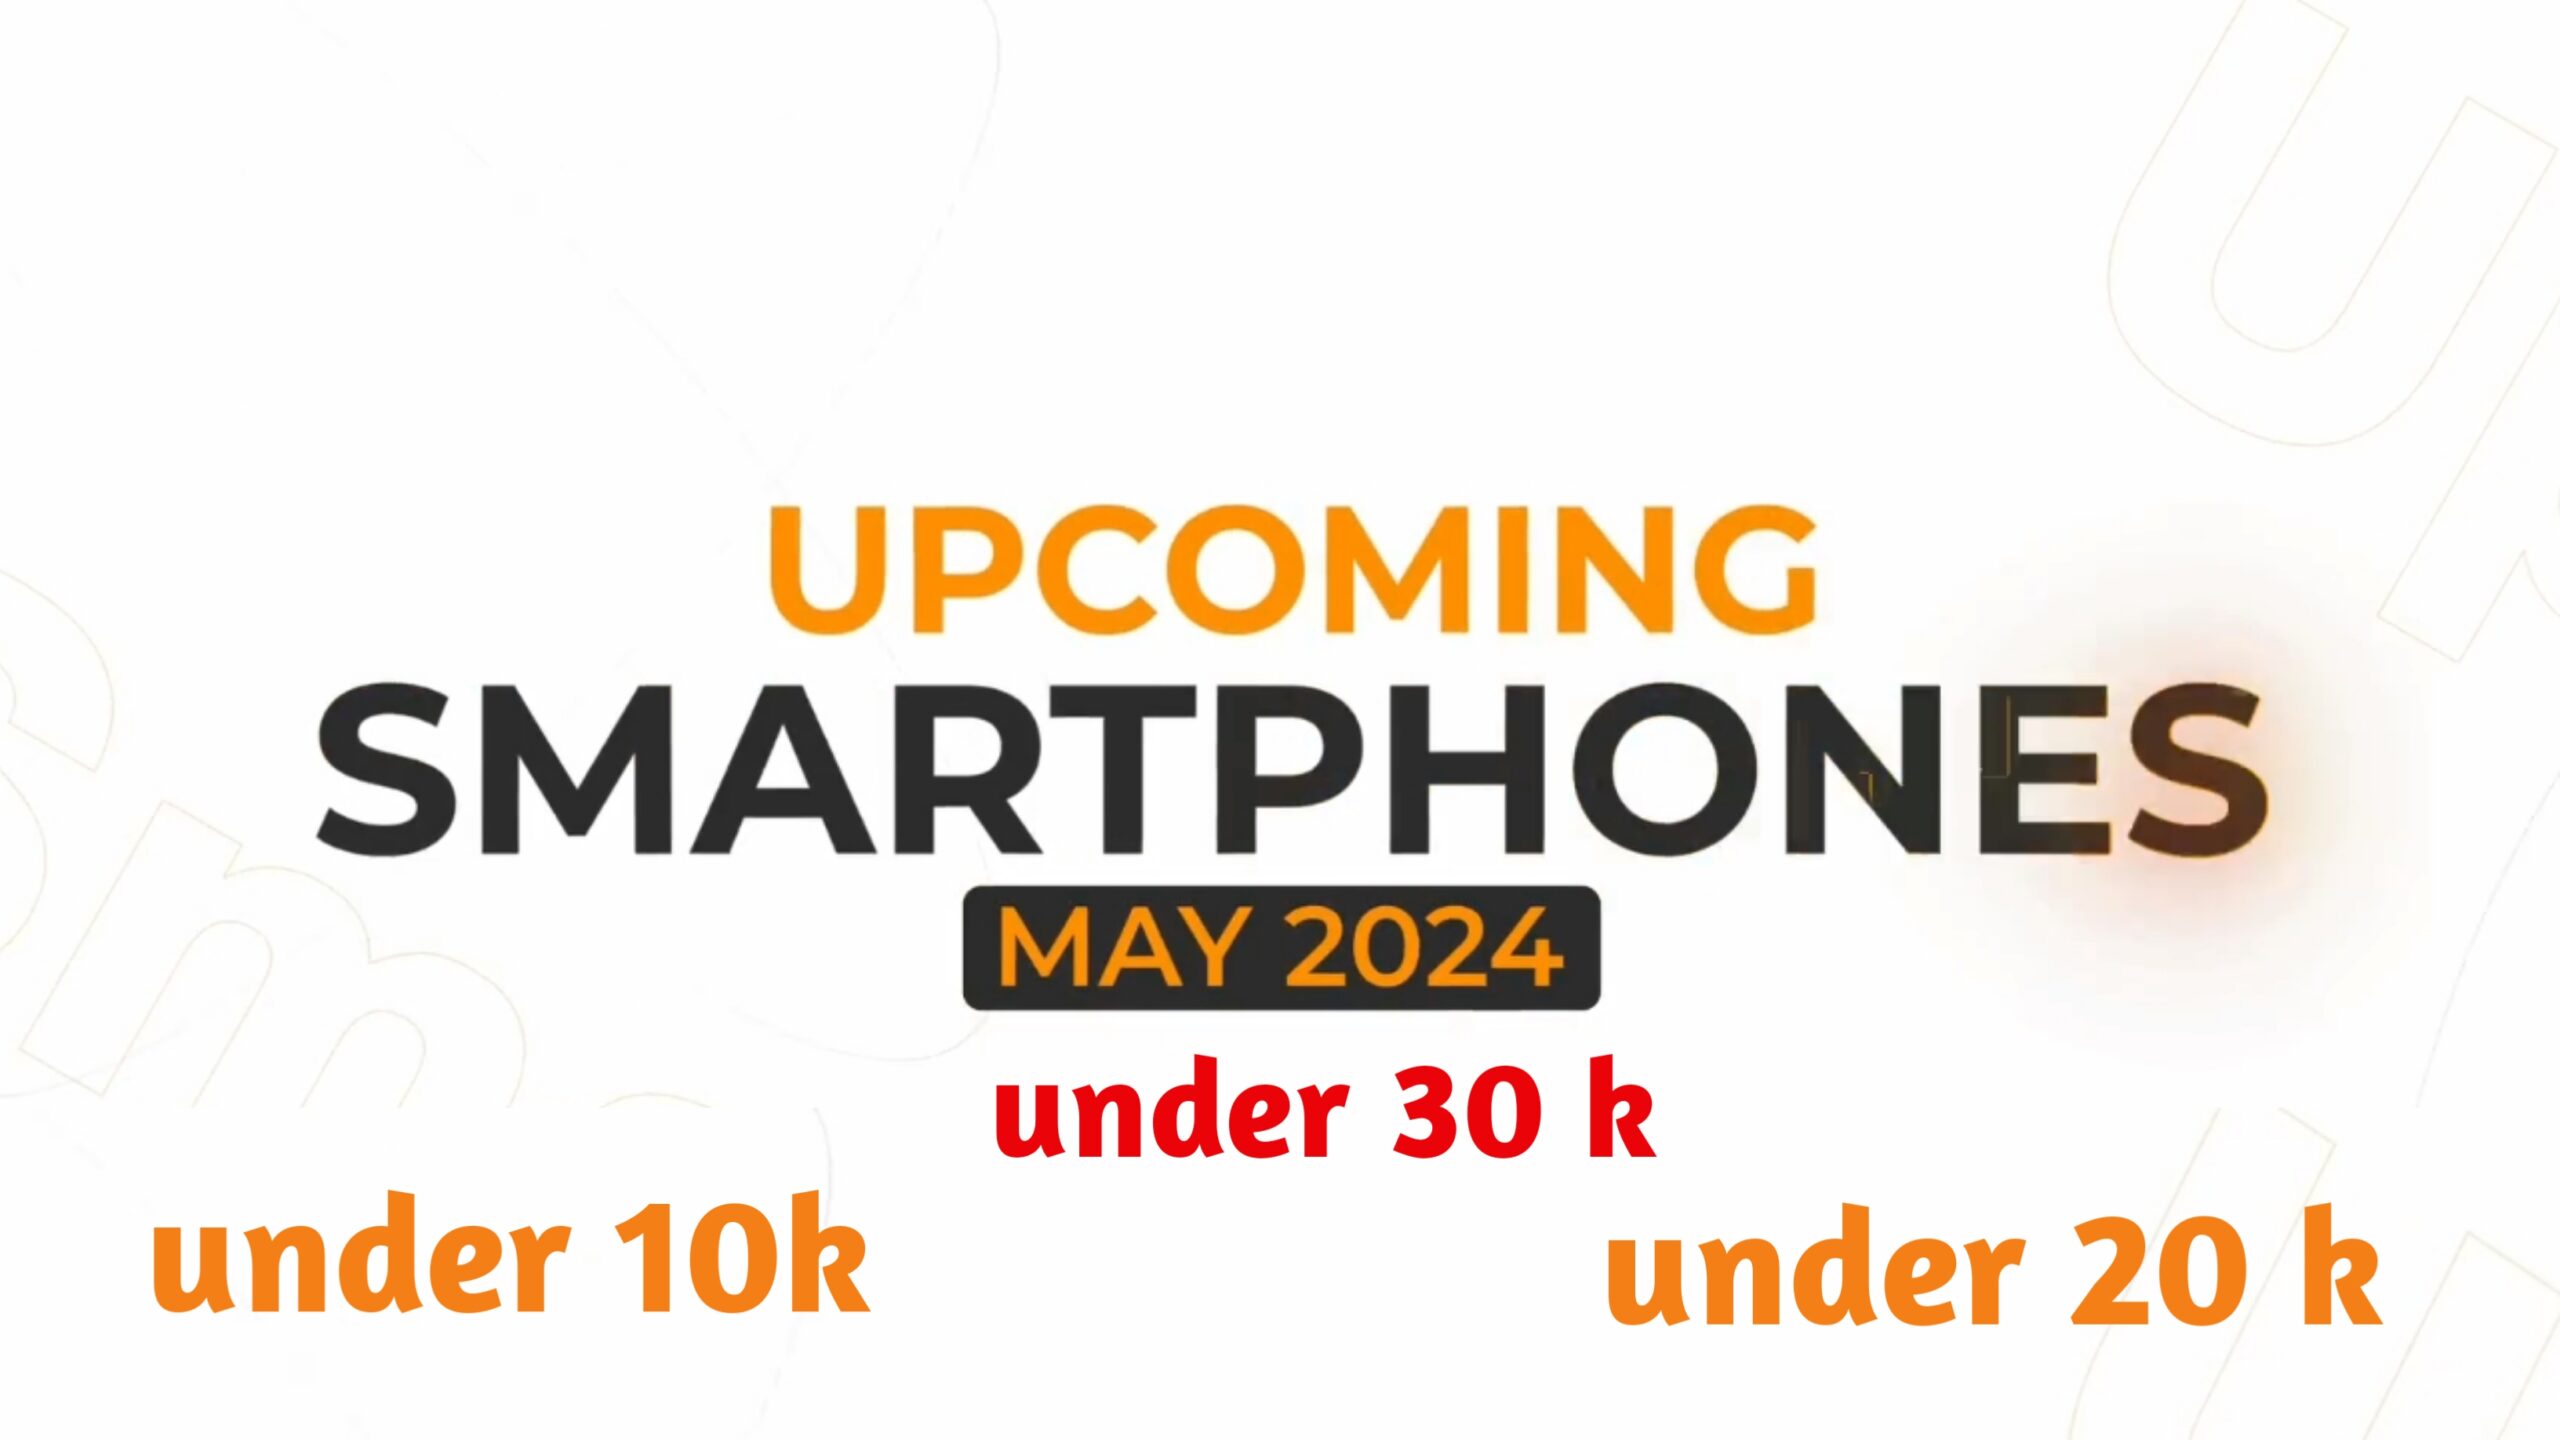 UPCOMING MOBILE PHONES LAUNCHES MAY 2024 